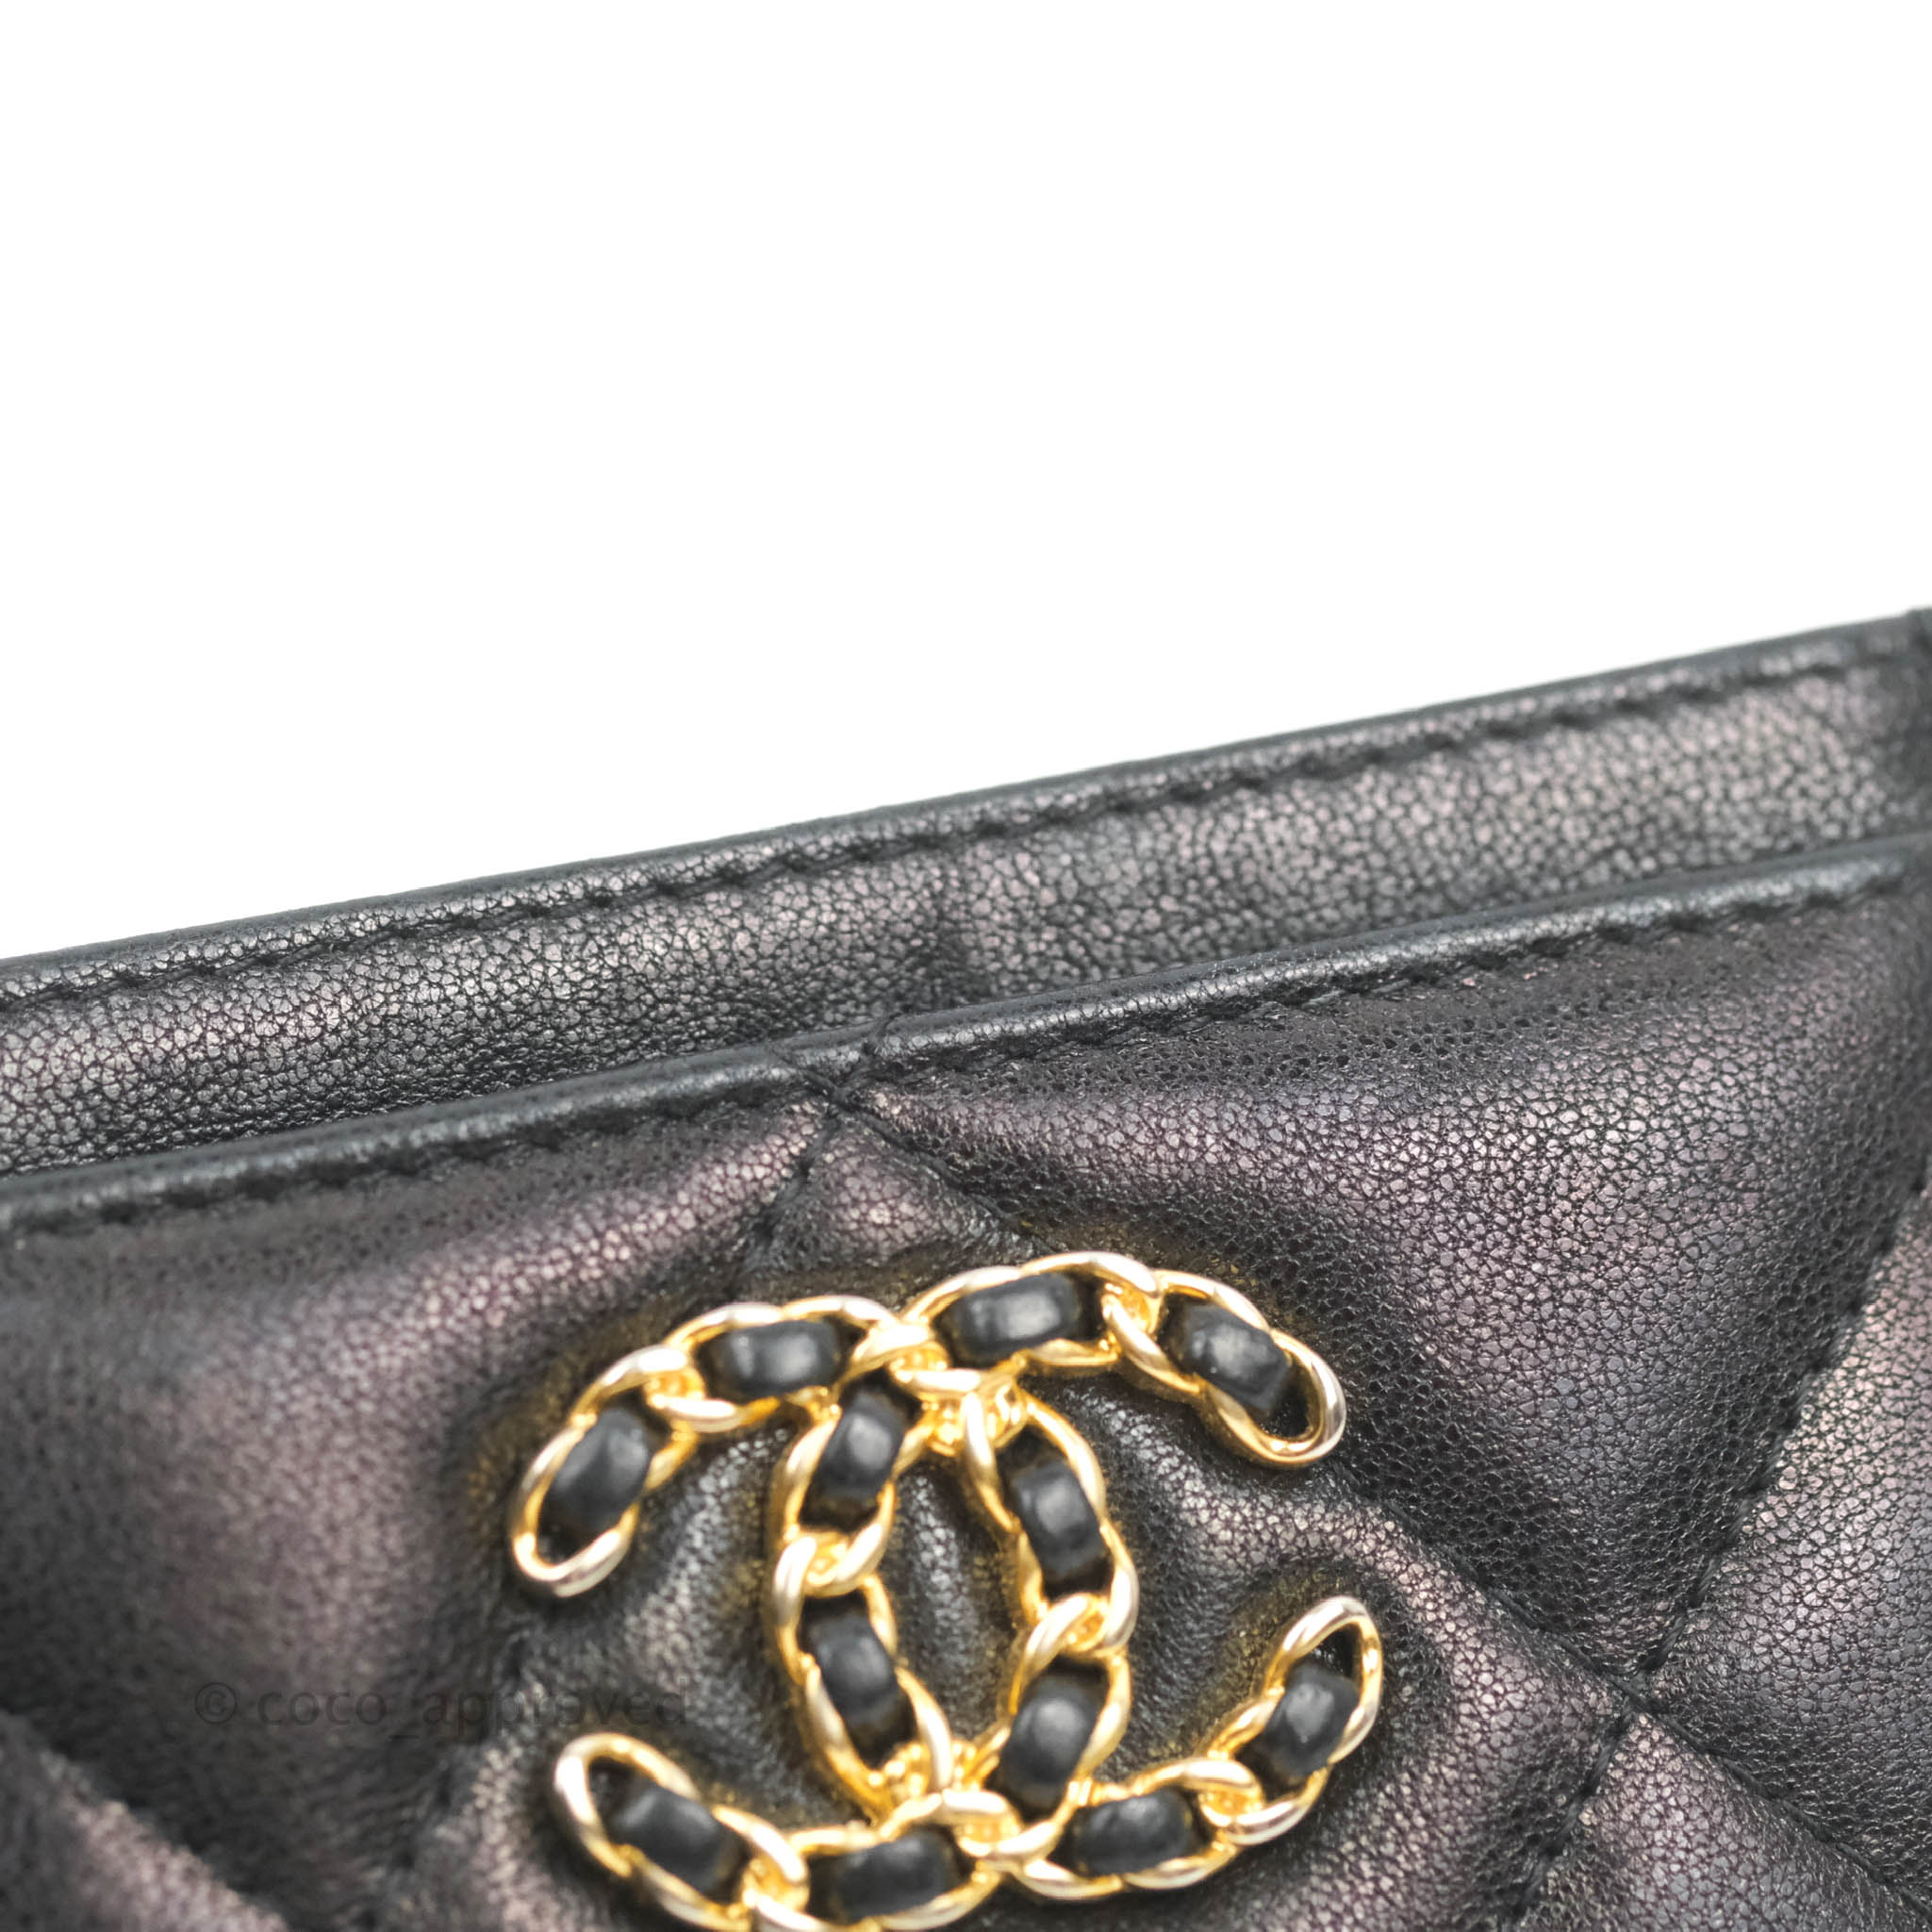 Chanel 19 Quilted Iridescent Black Flat Card Holder – Coco Approved Studio